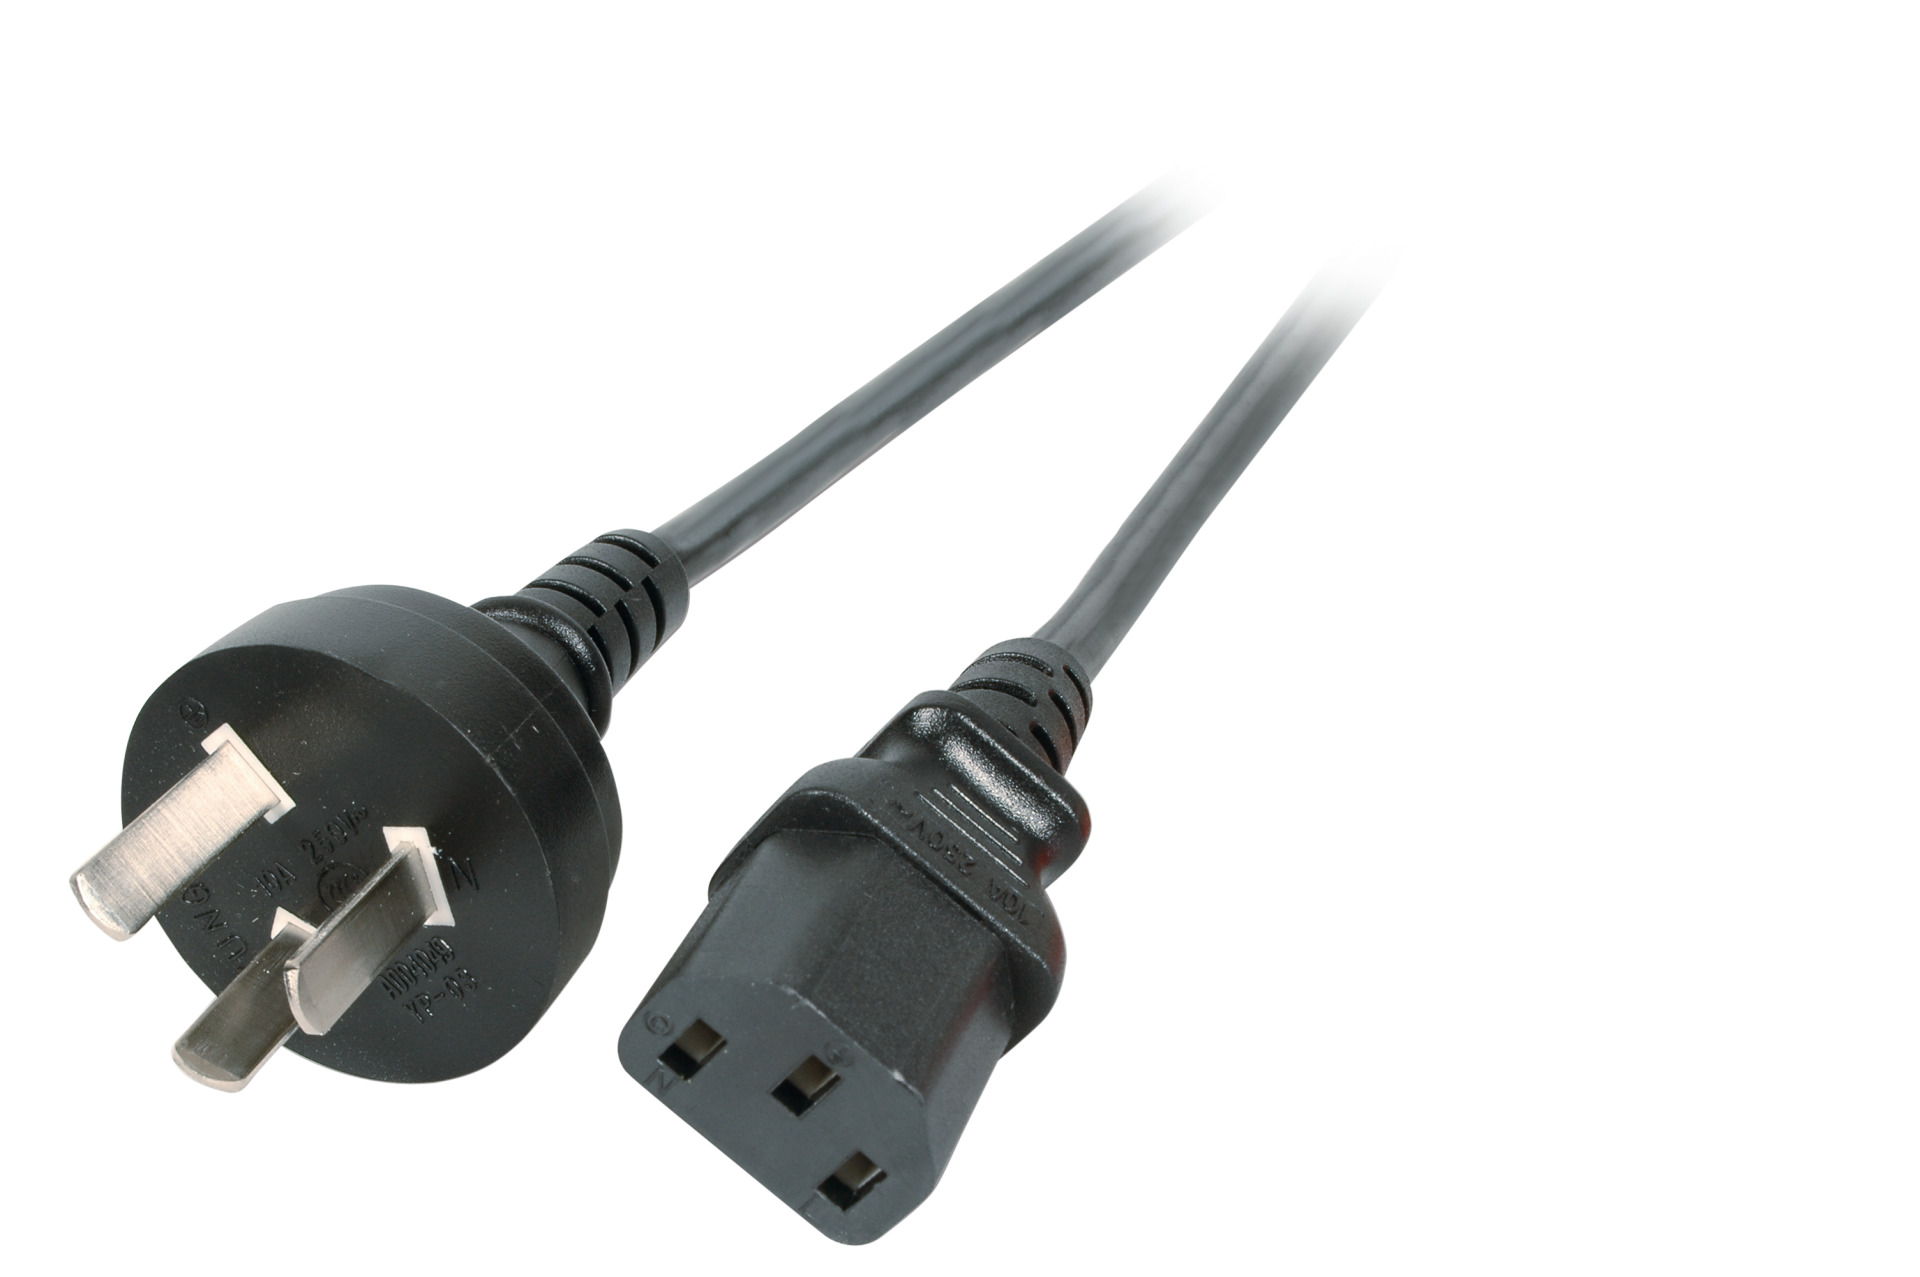 Power Cable China Type I - C13 180°, Black, 1.8 m, 3 x 0.75 mm²